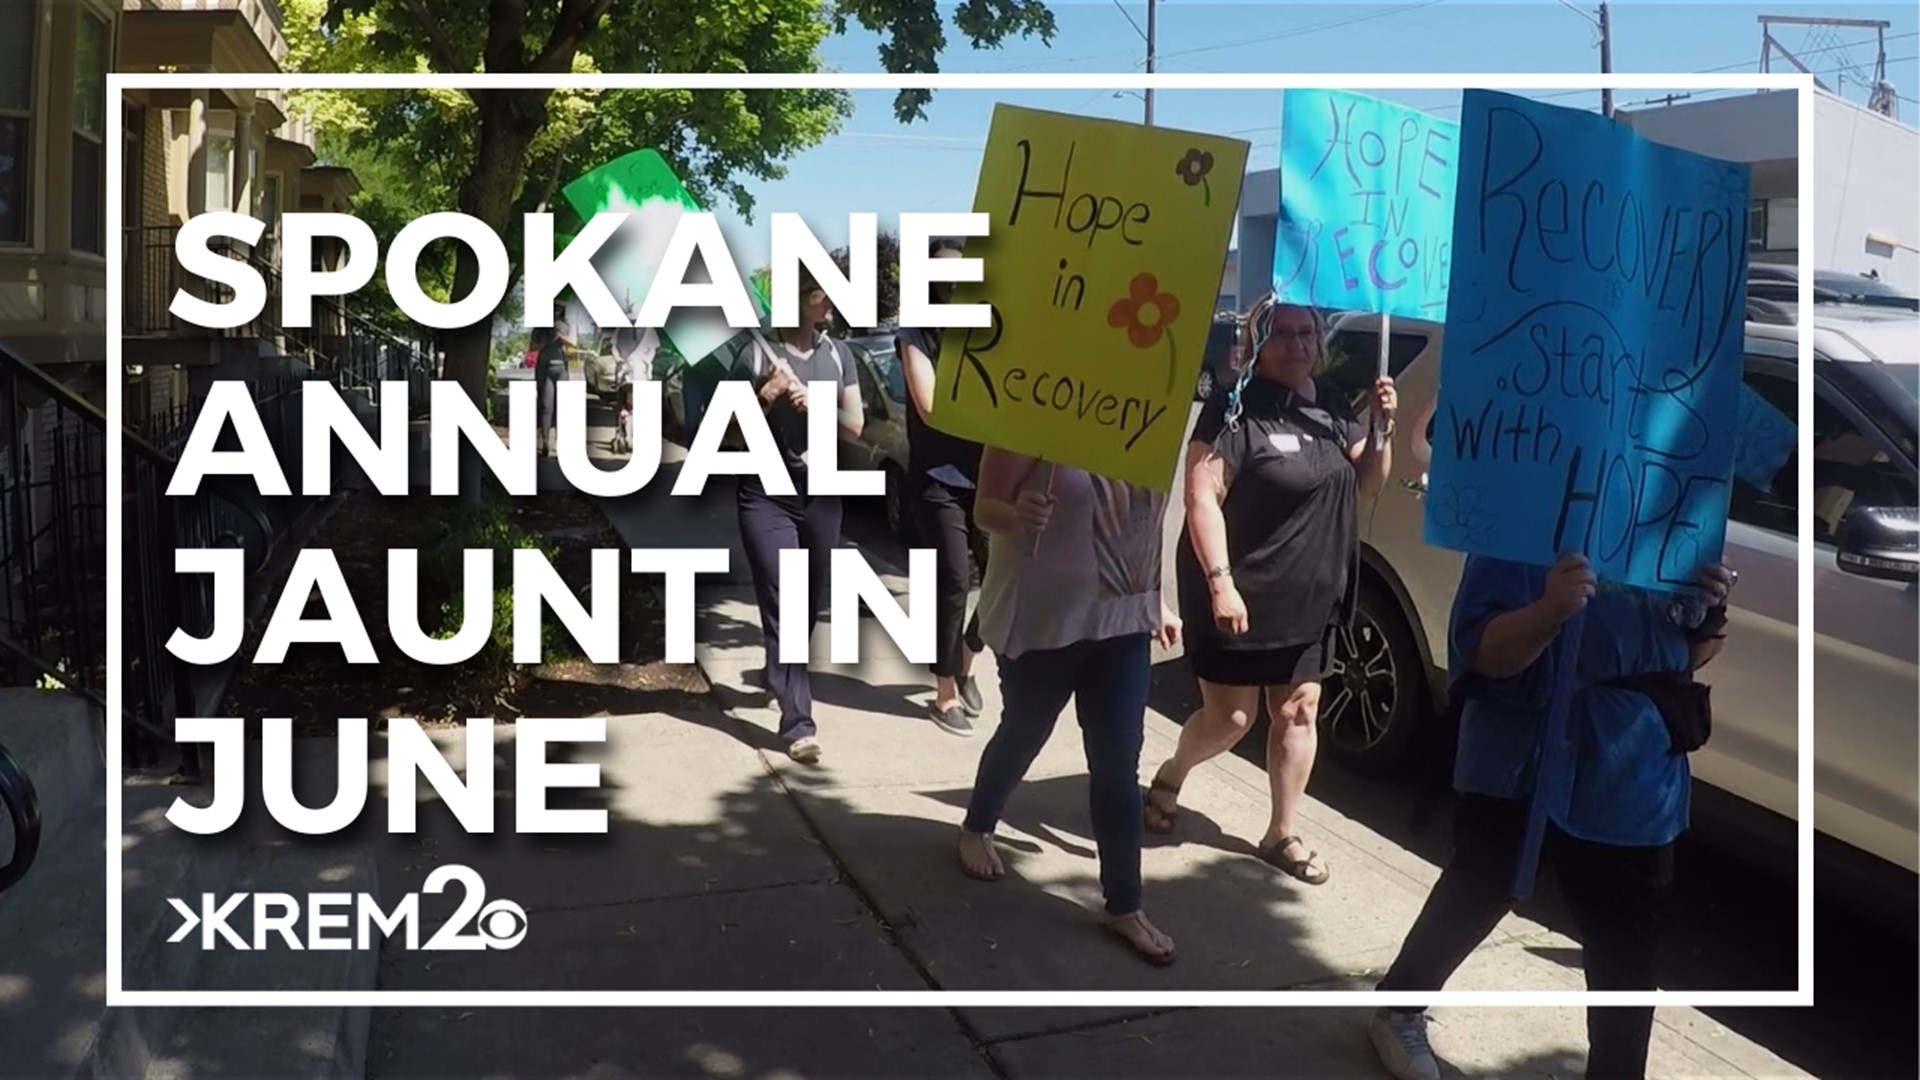 Returning to Spokane in three years, the Jaunt in June supports mental health recovery.